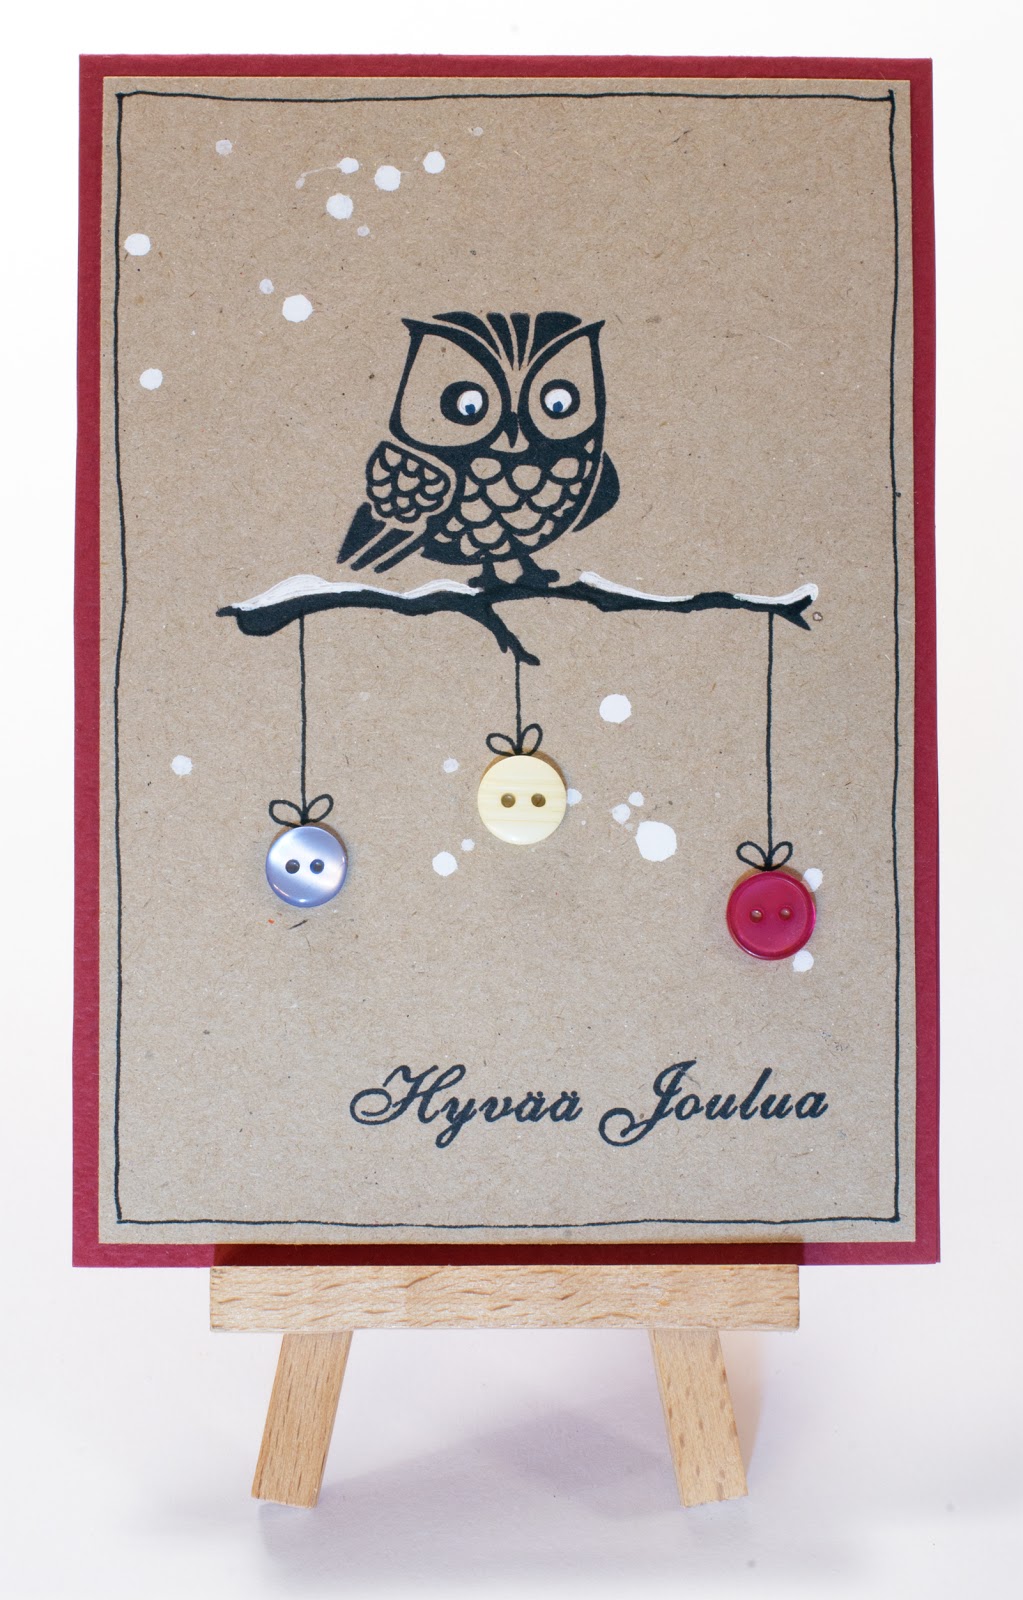 Cardmaking: Simple and easy to make Christmas cards